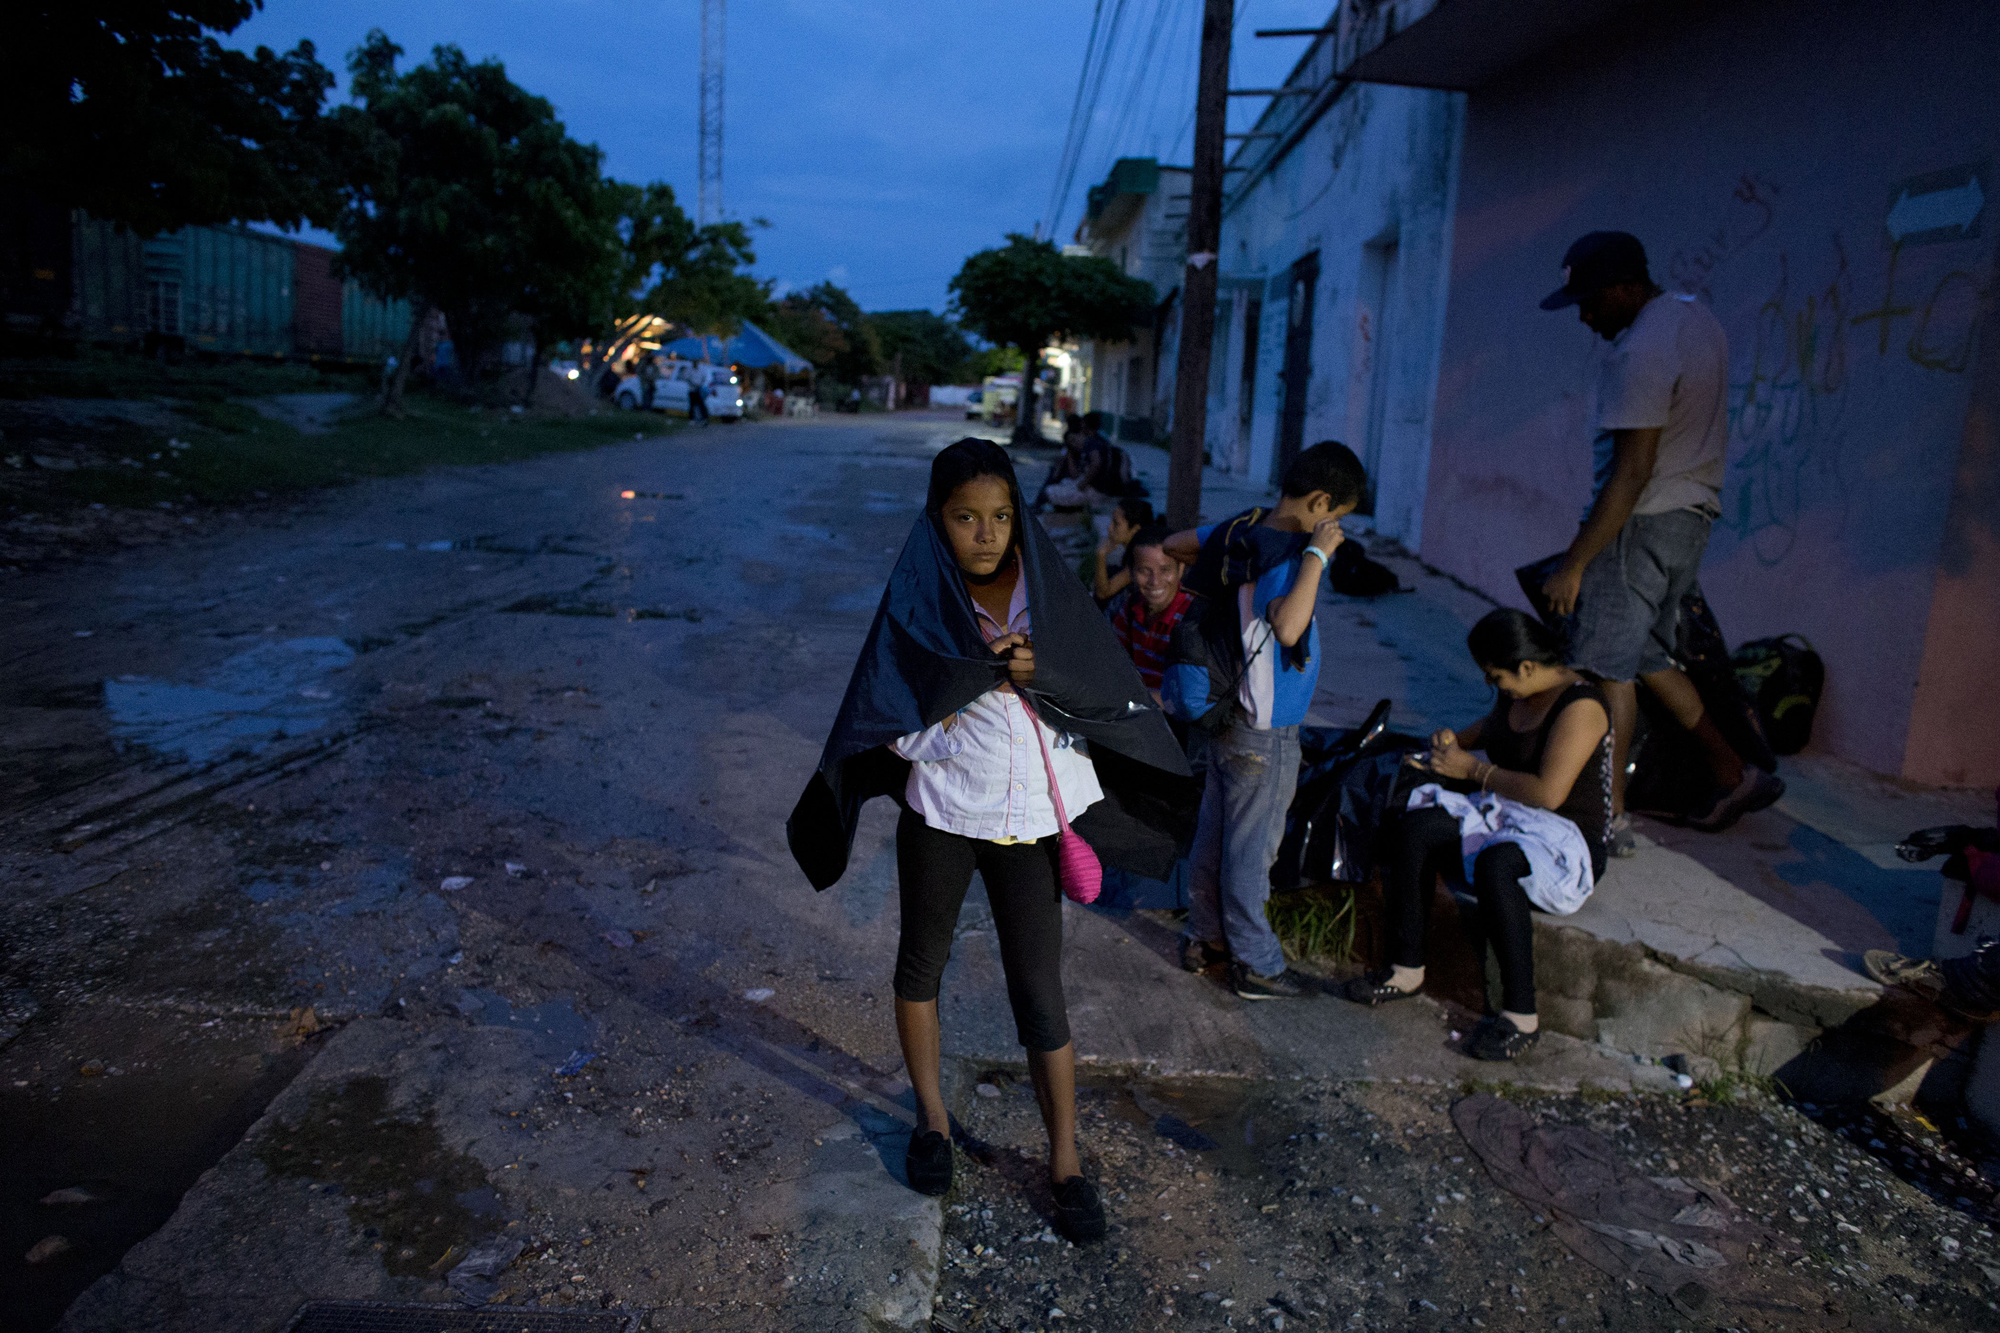 Cynthia Lemus, 12, waits with her family and other Central American migrants, for the arrival of a northbound freight train, in Arriaga, Chiapas state, Mexico, June 19.